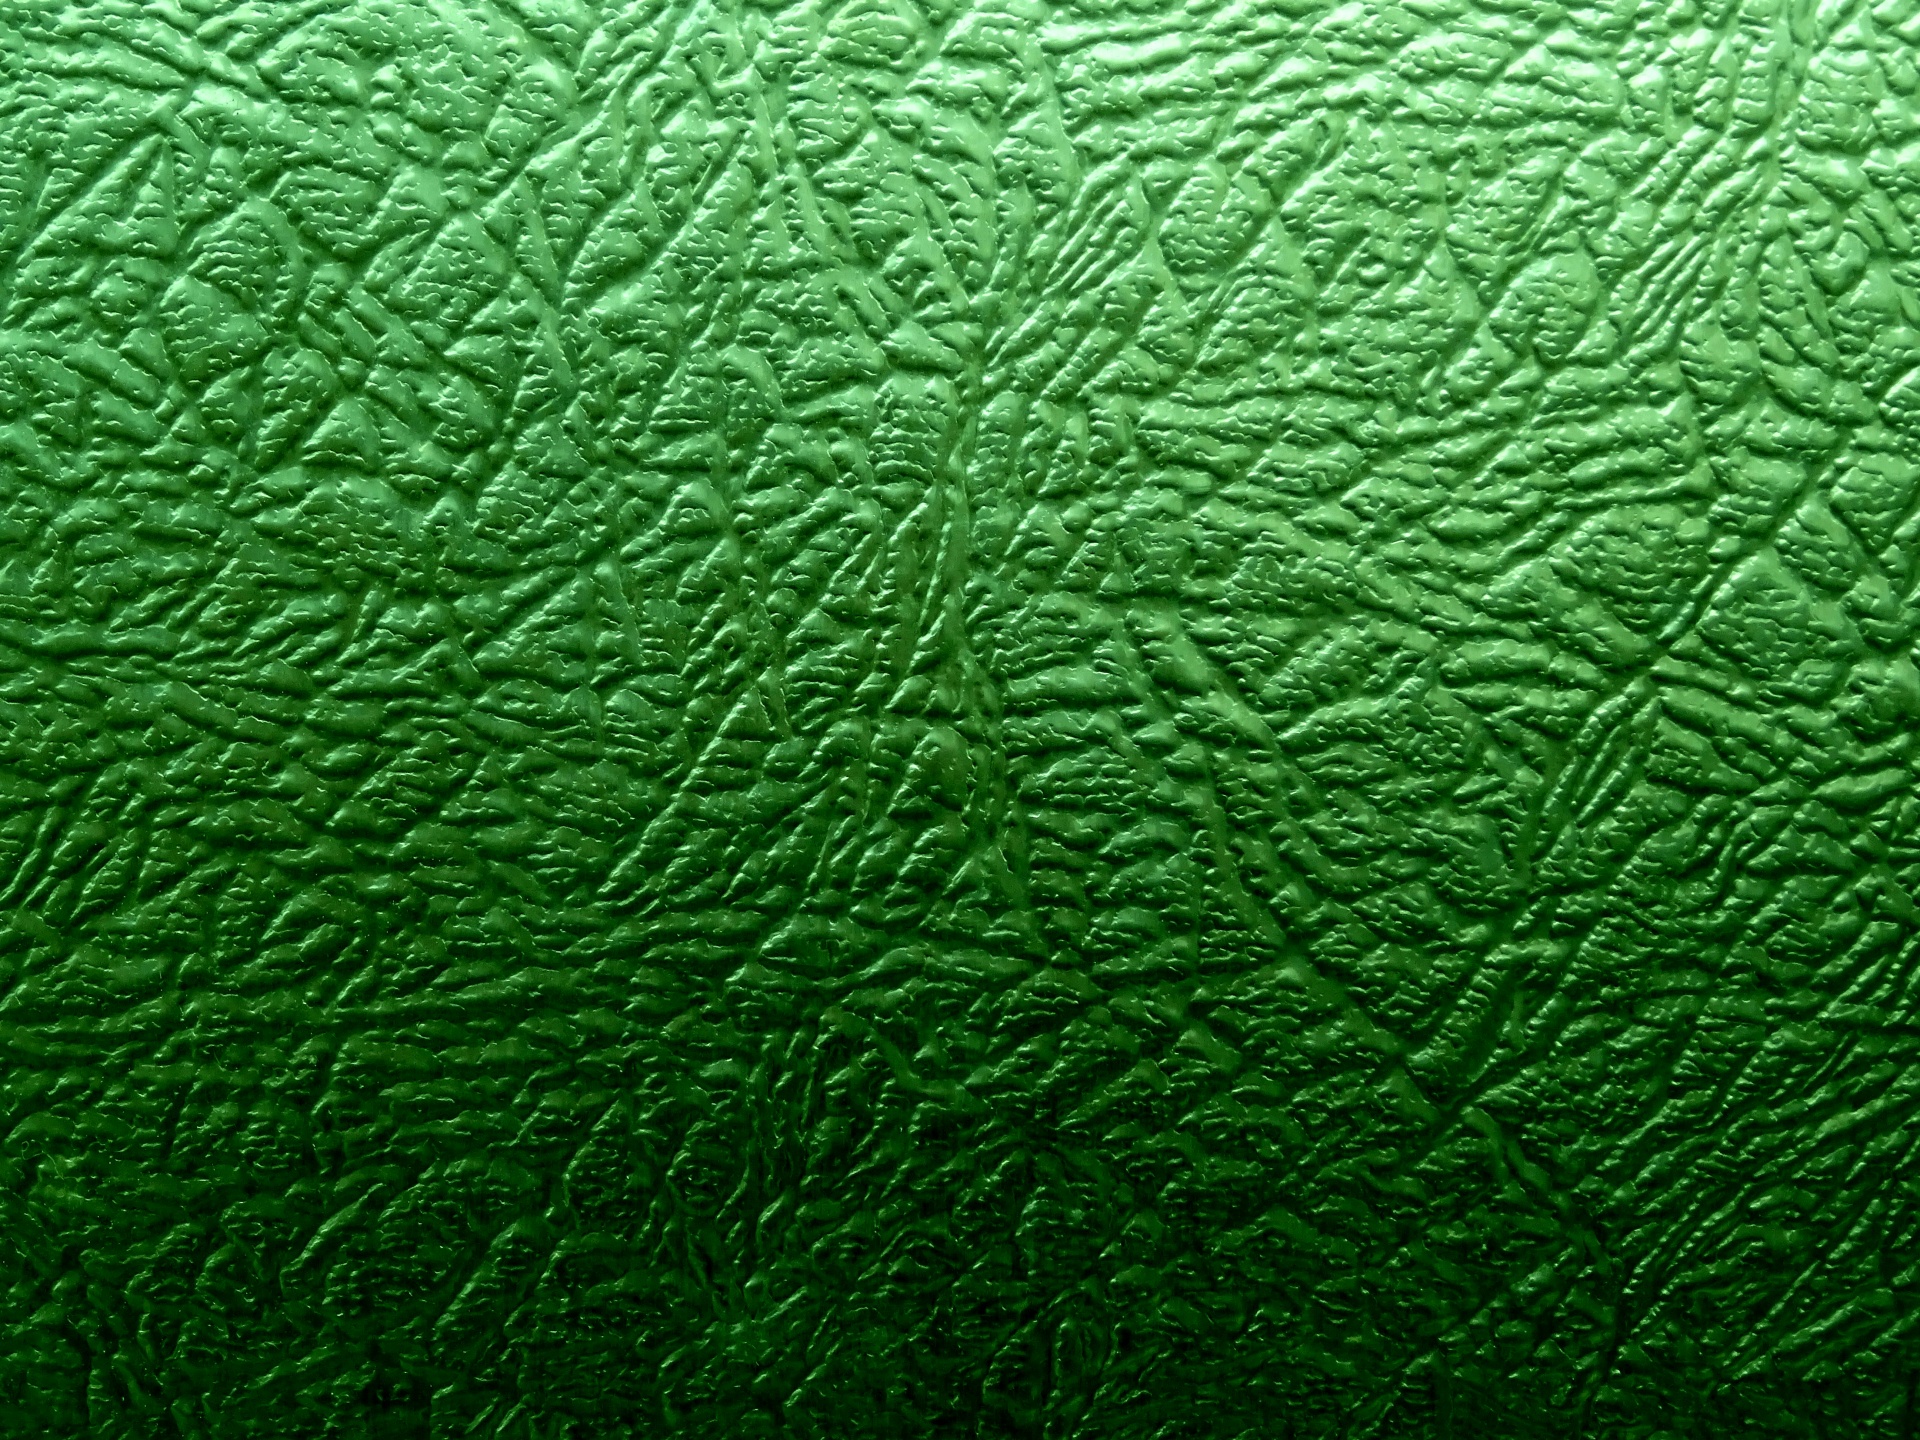 Green Bottom Fading Background